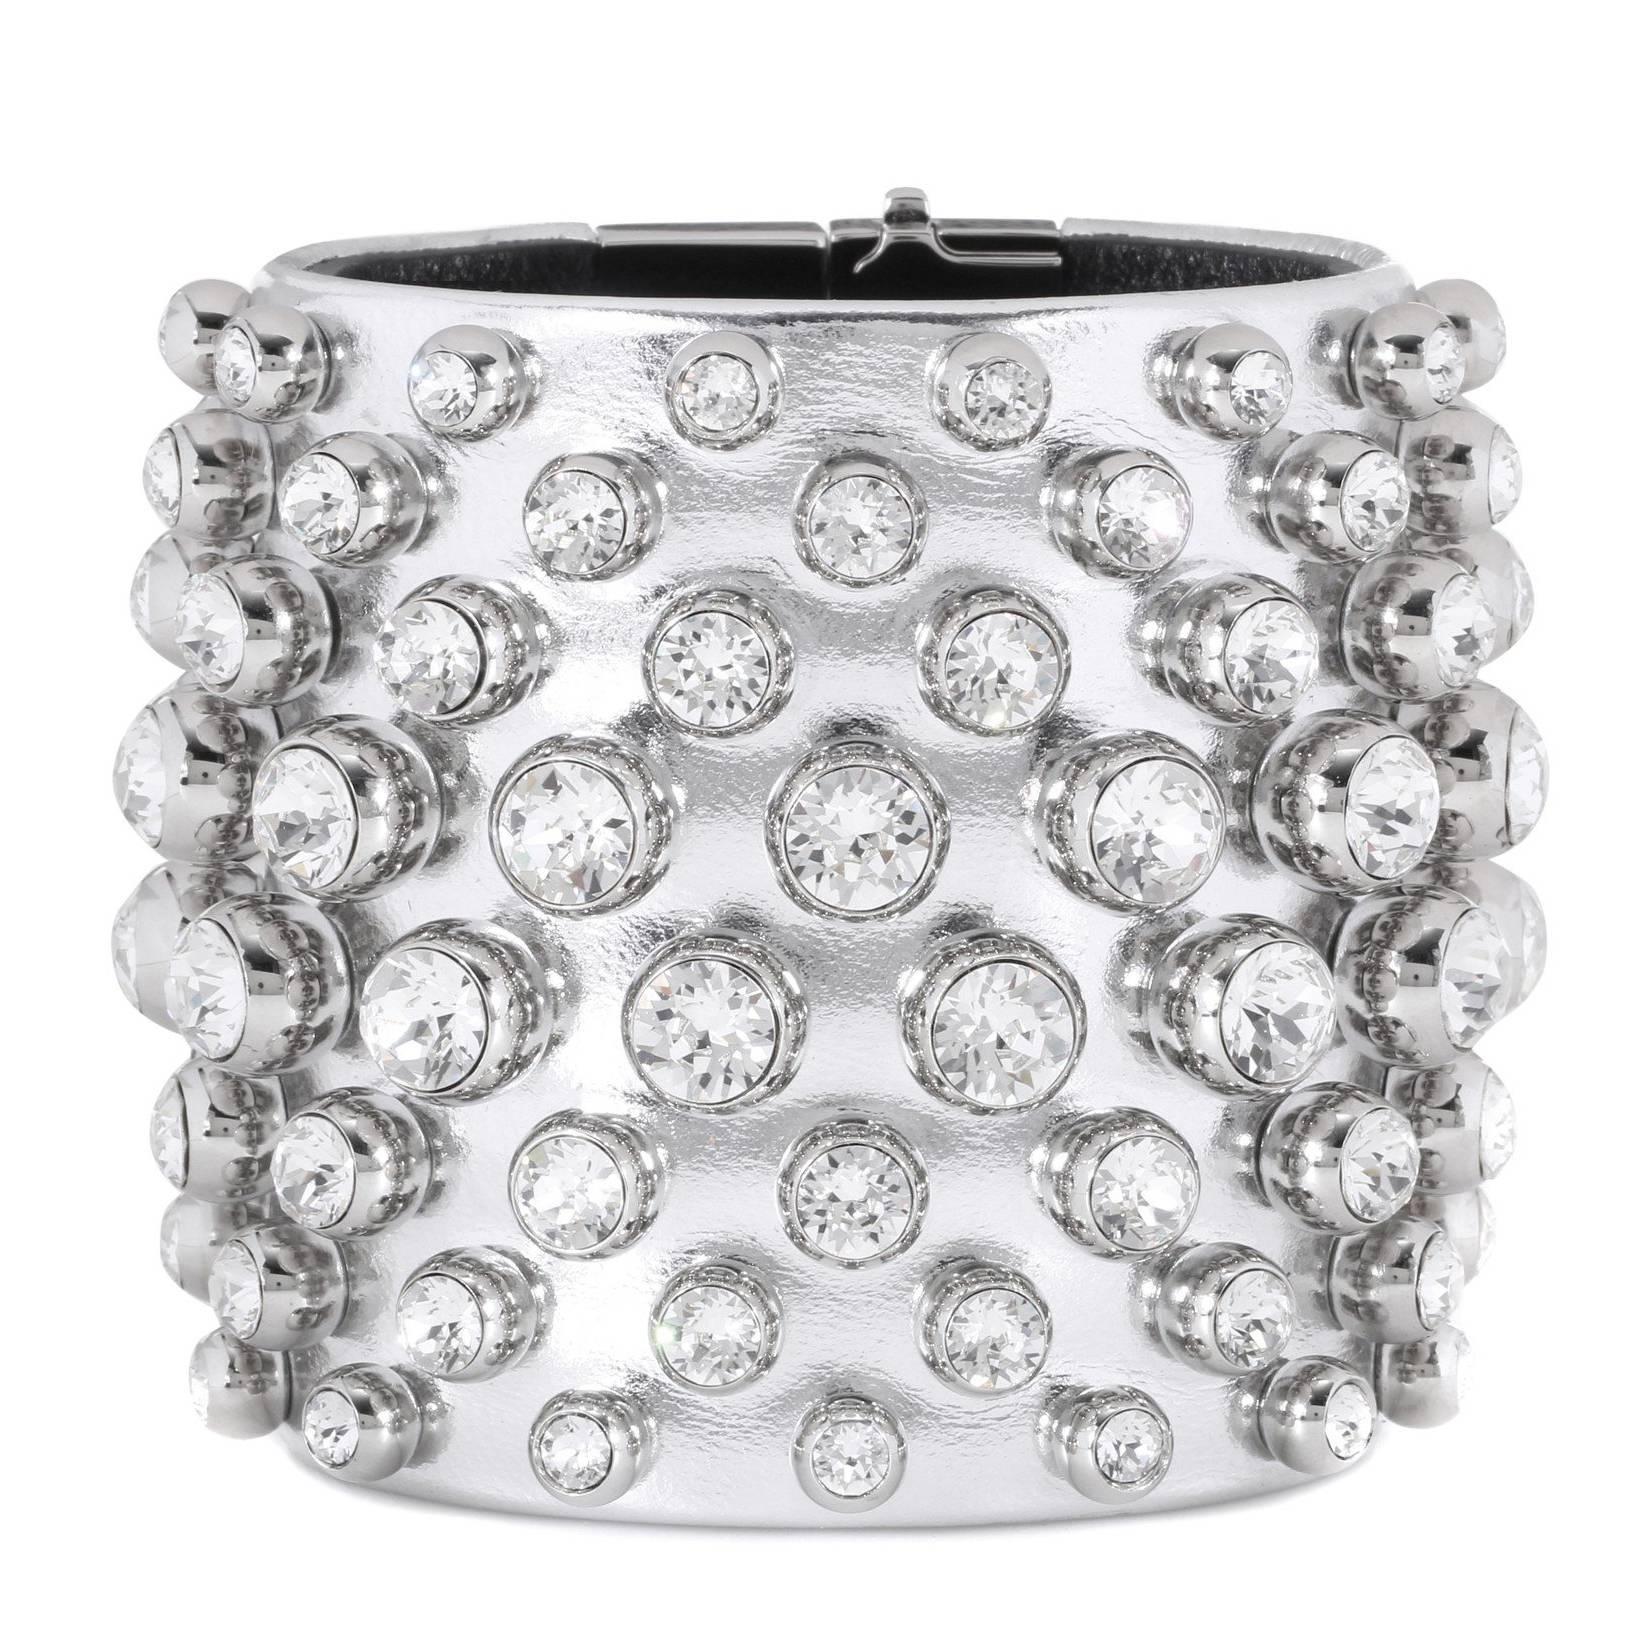 Tom Ford NEW & SOLD OUT Swarovski Crystal Leather Evening Cuff Bracelet